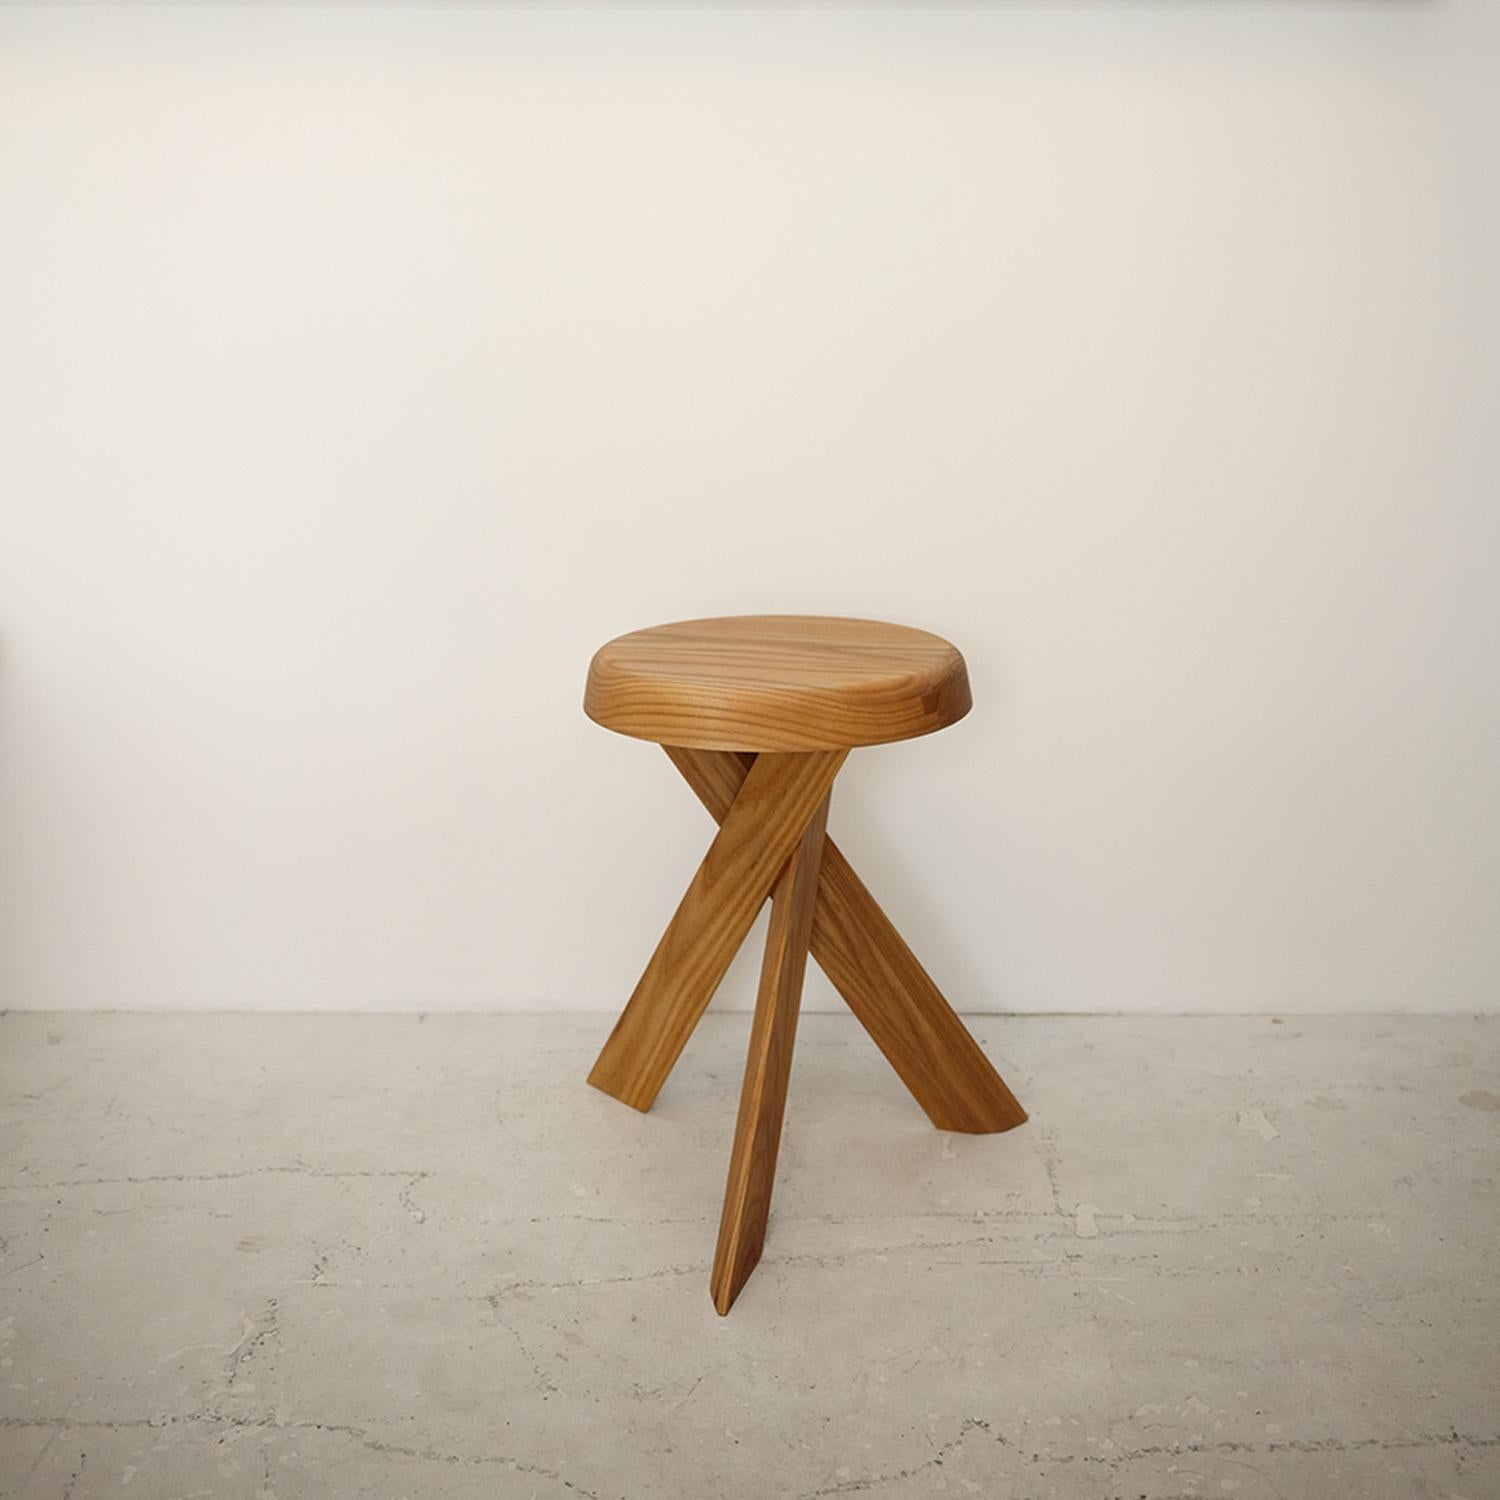 S31 is the second in a series of stools designed by Pierre Chapot in 1974. The stool's most striking feature is its base structure, which consists of three legs that converge to form a solid and stable base, even when a person's weight is placed on